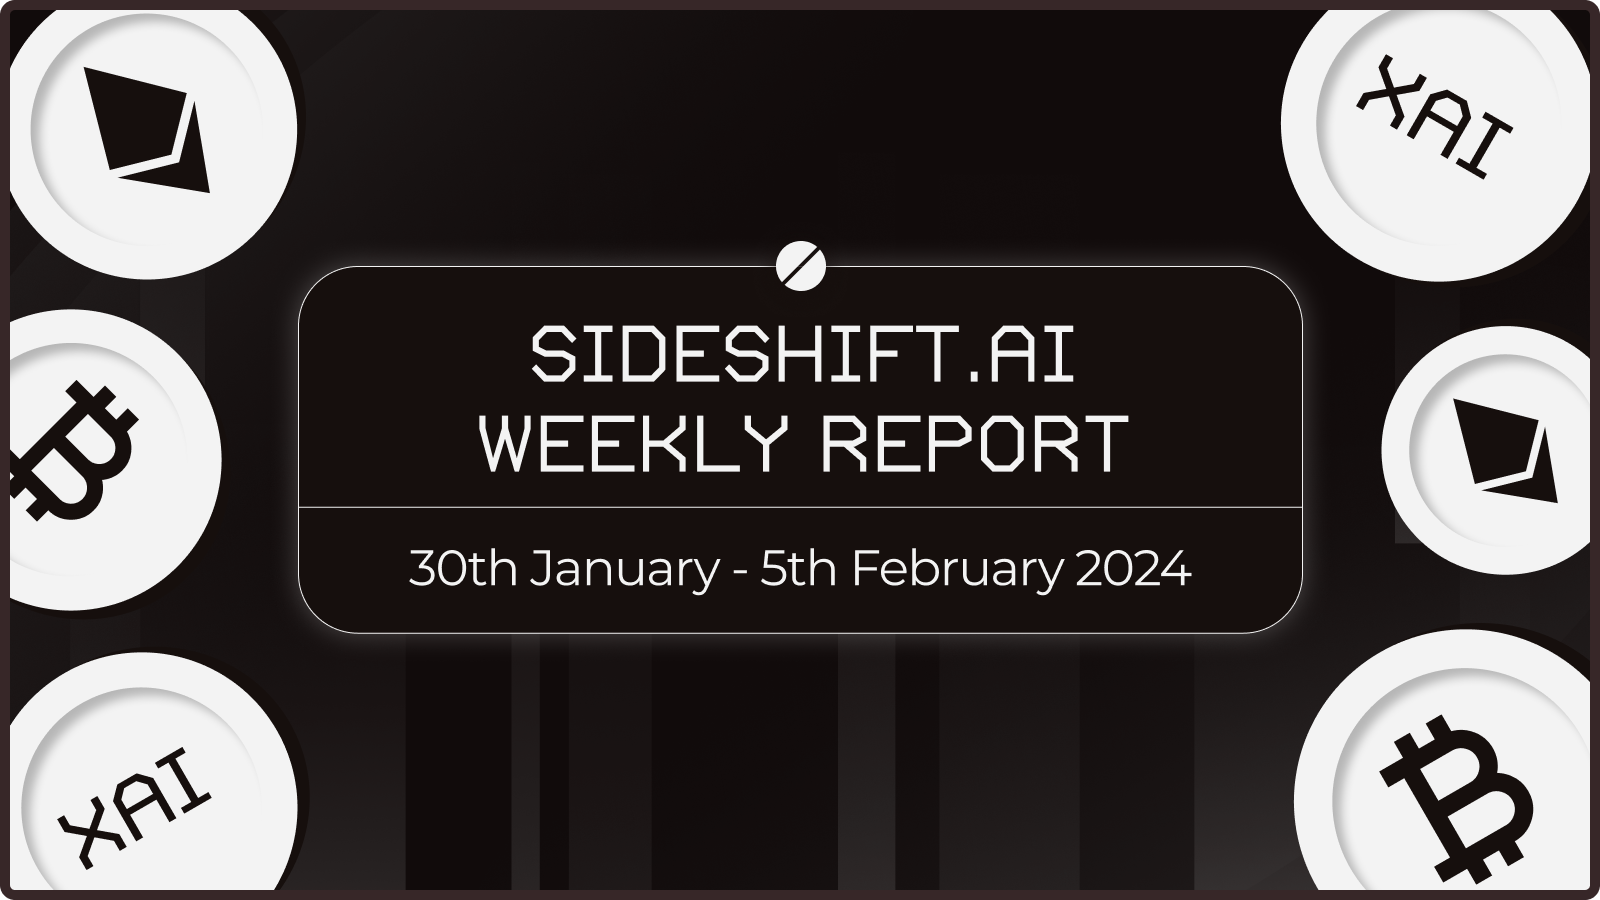 SideShift.ai Weekly Report | 30th January - 5th February 2024